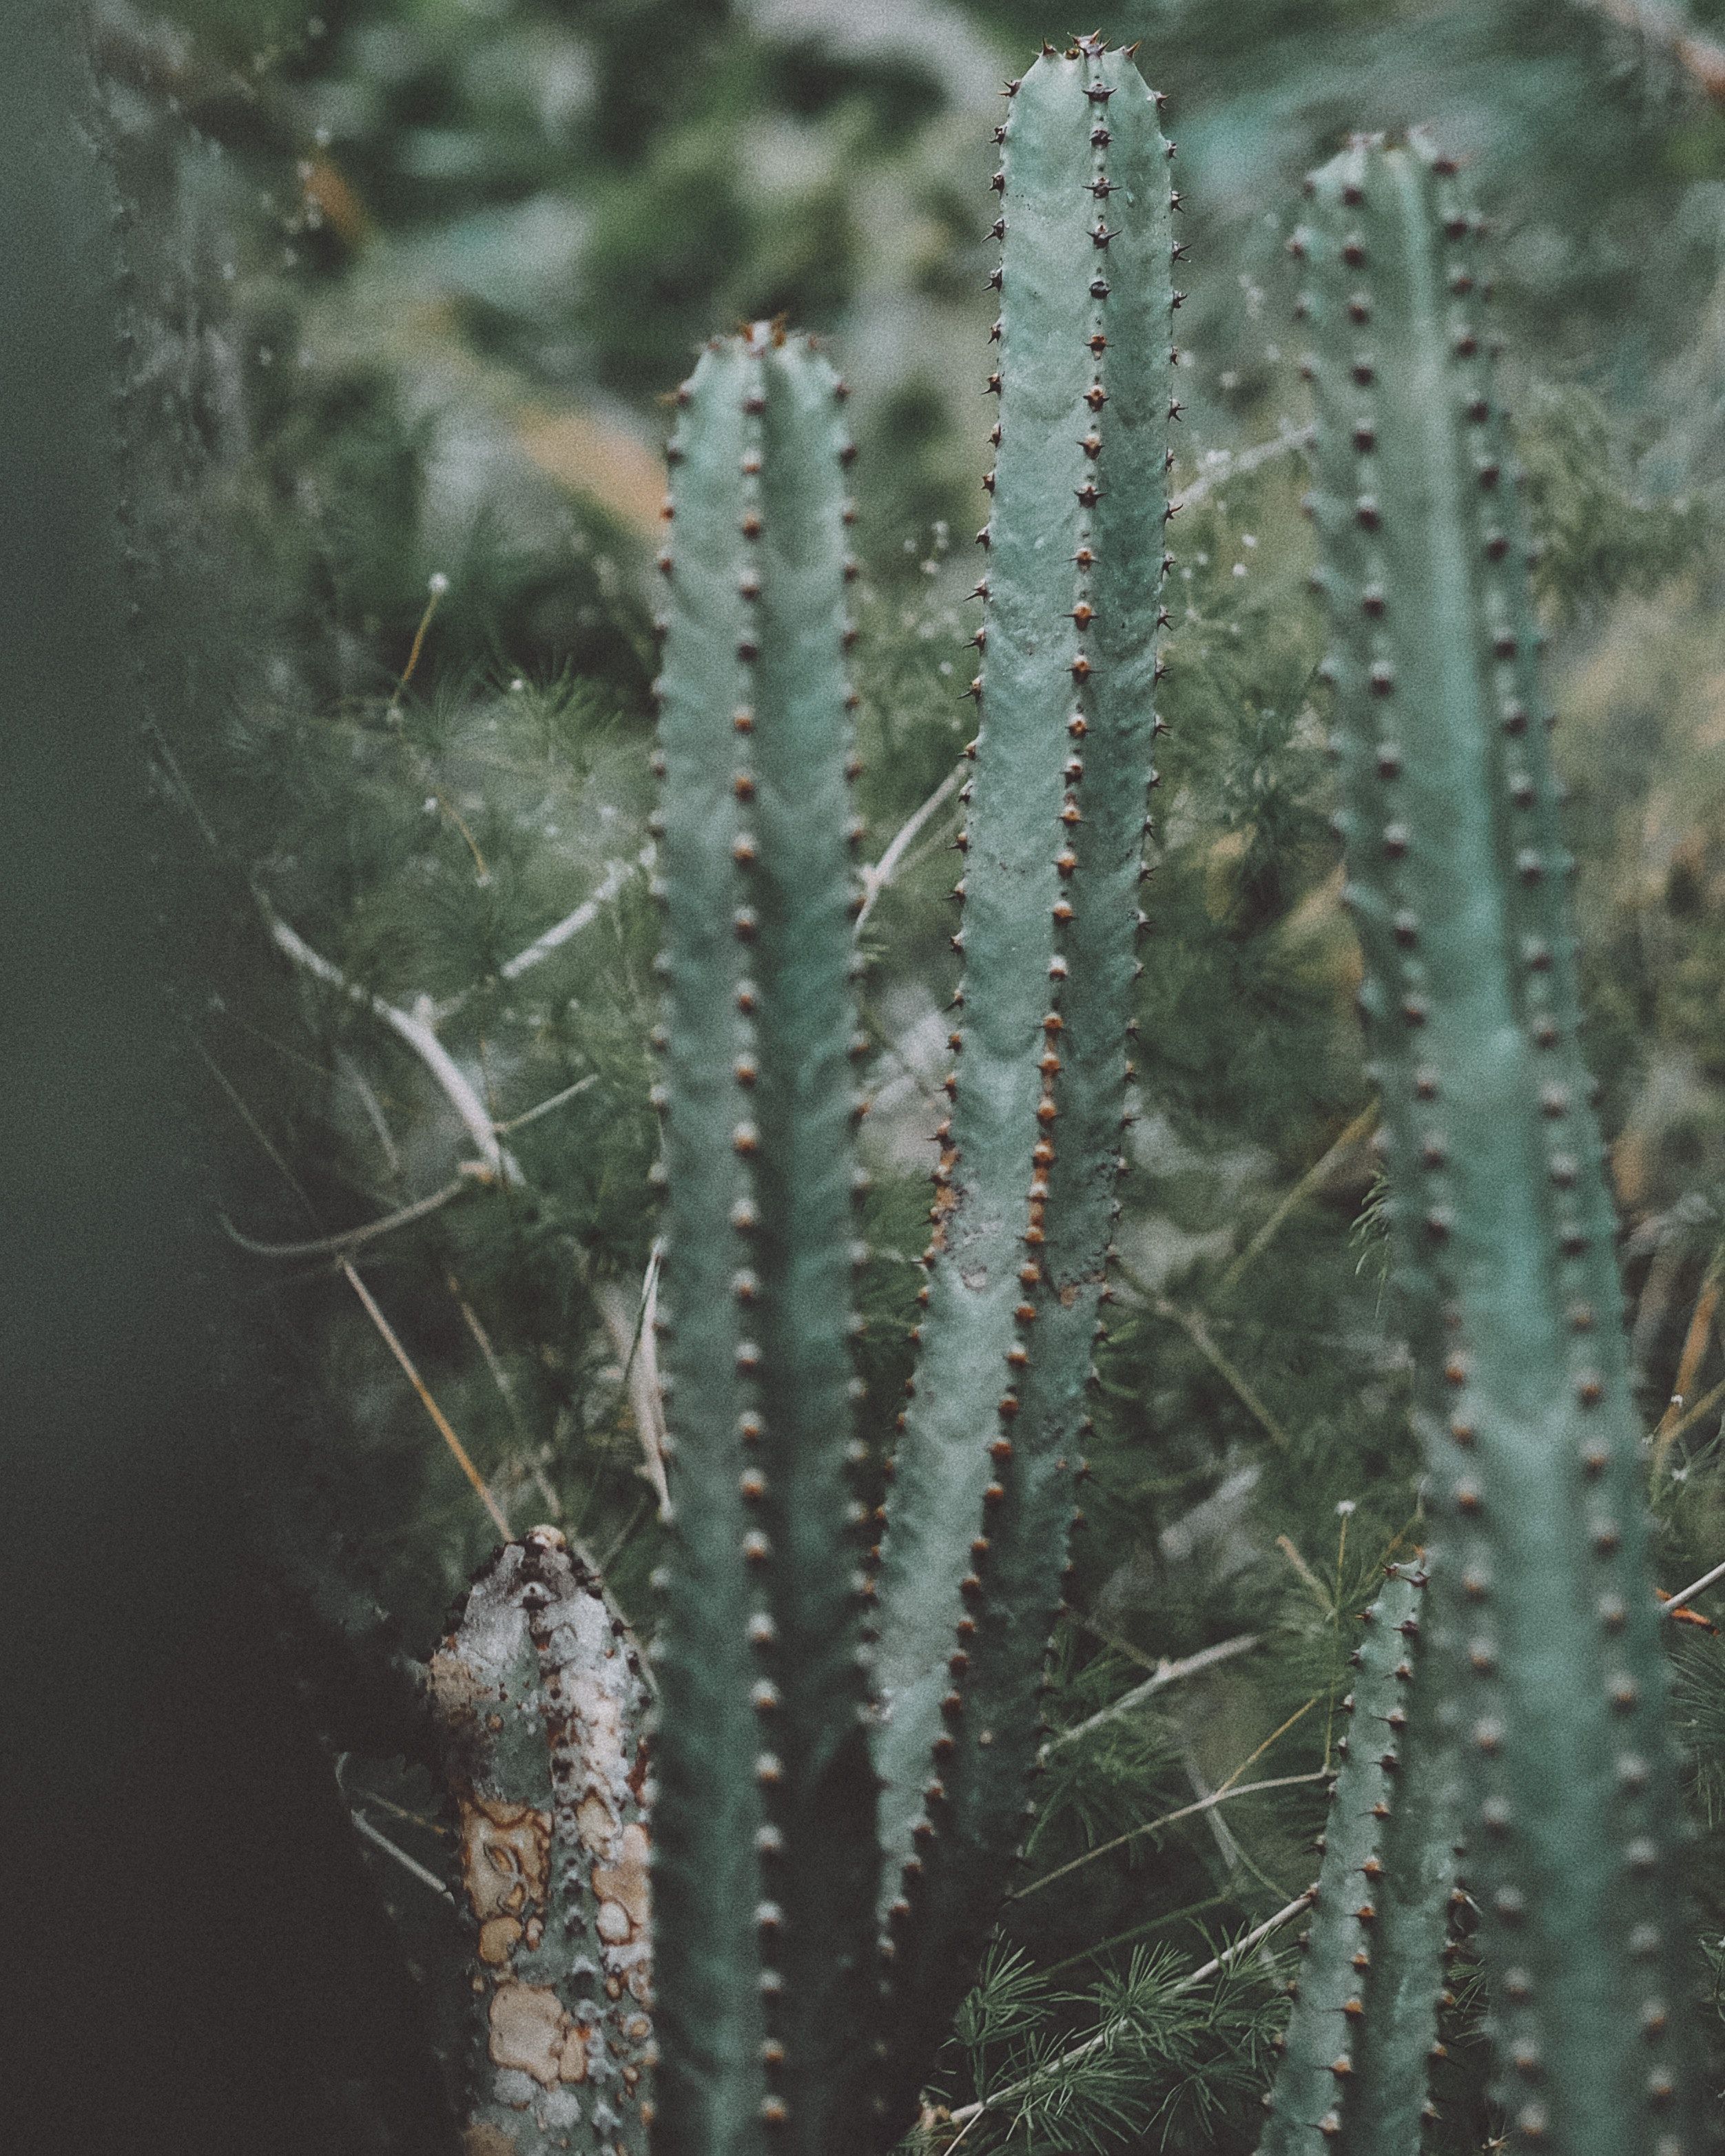 A close up of a cactus with a blurred background. - Cactus